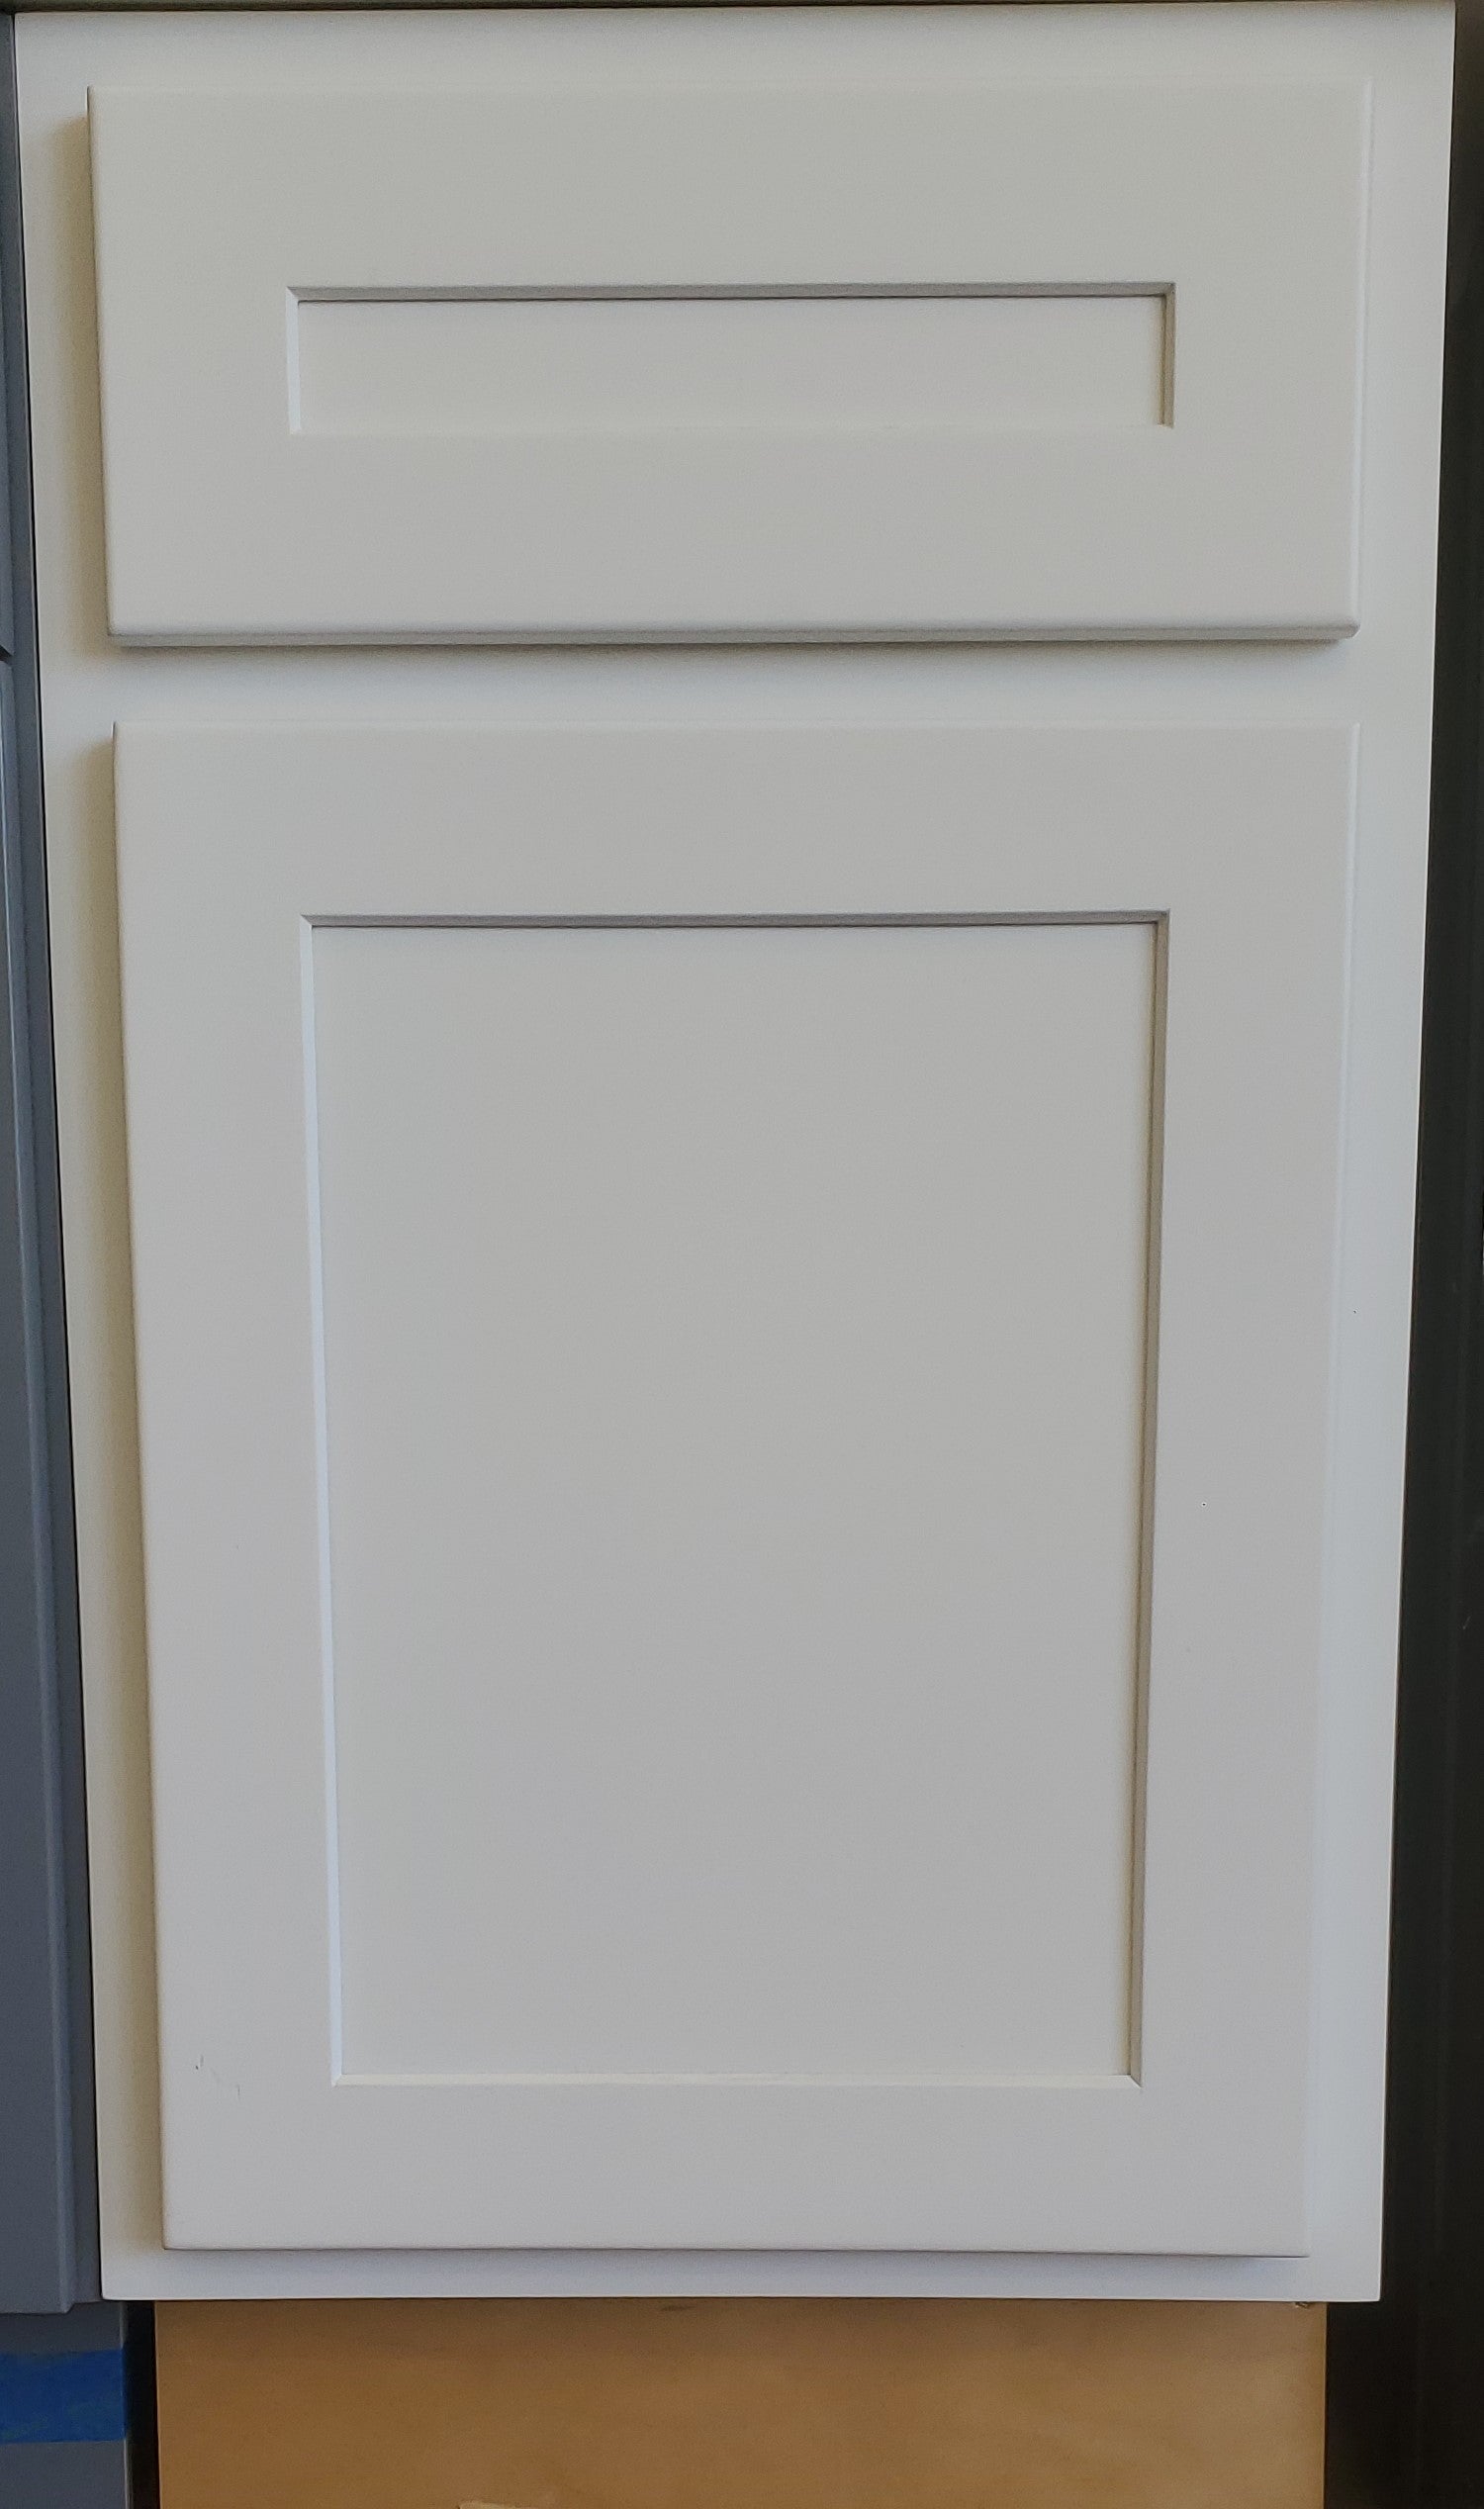 Refrigerator Panel Cabinet Side and face frame